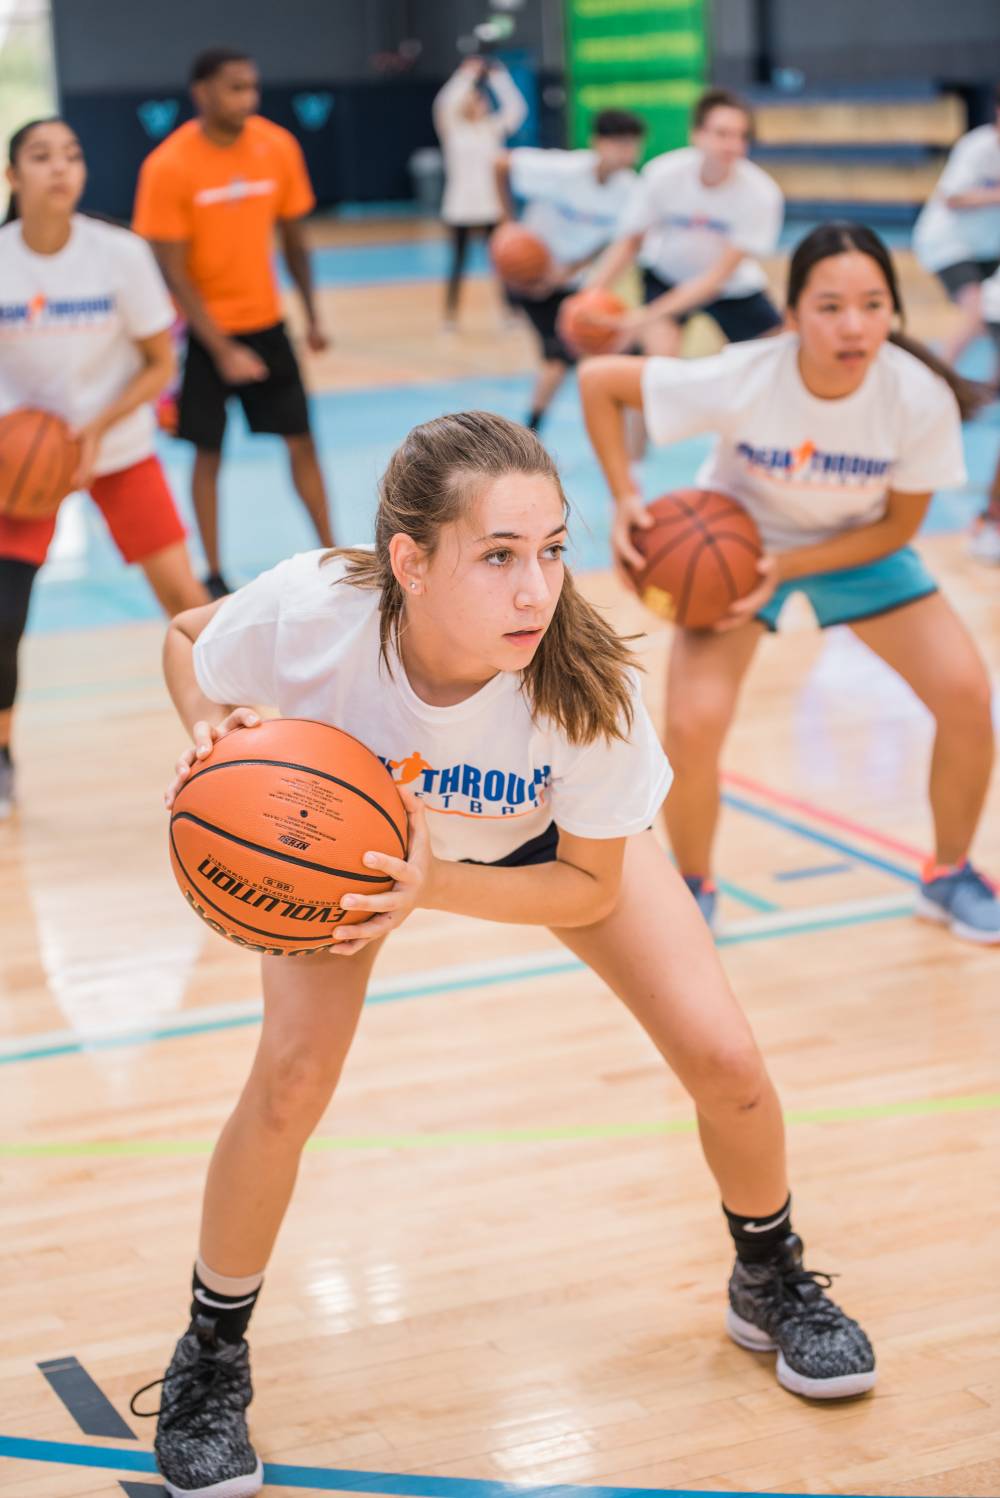 TOP VARIOUS LOCATIONS BASKETBALL CAMP: Breakthrough Basketball Camps is a Top Basketball Summer Camp located in  Various Locations offering many fun and enriching Basketball and other camp programs. 